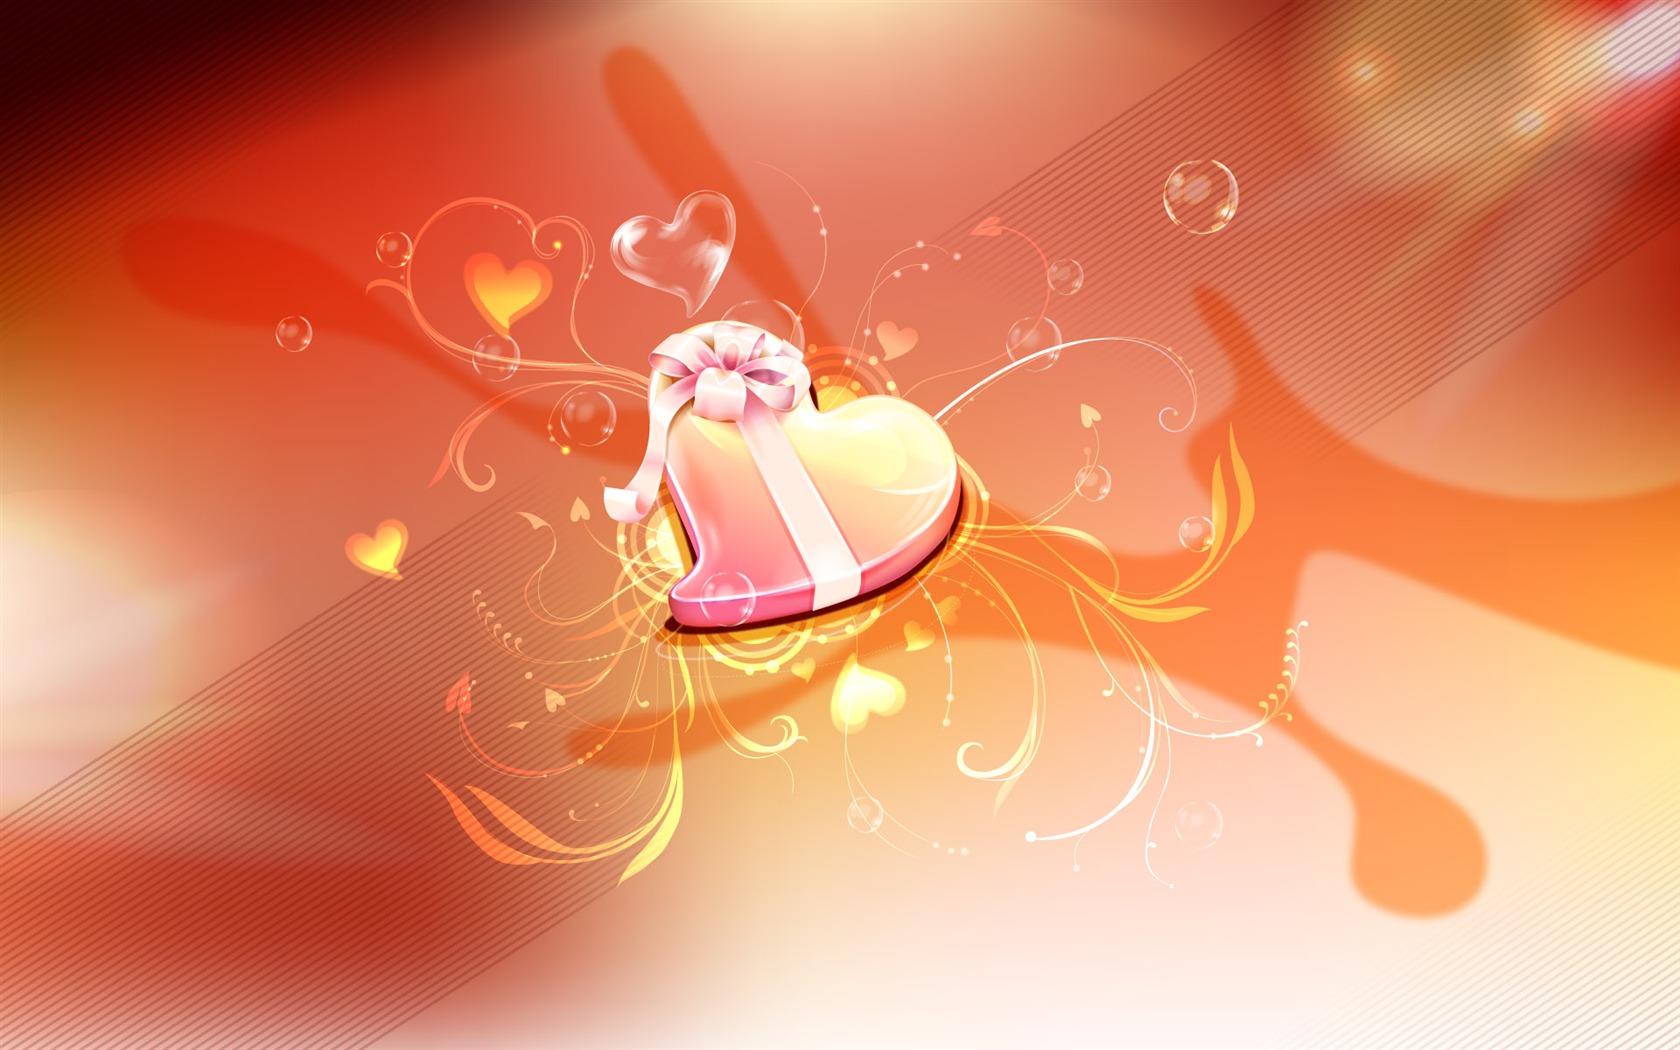 Valentine's Day Love Theme Wallpapers (2) #11 - 1680x1050